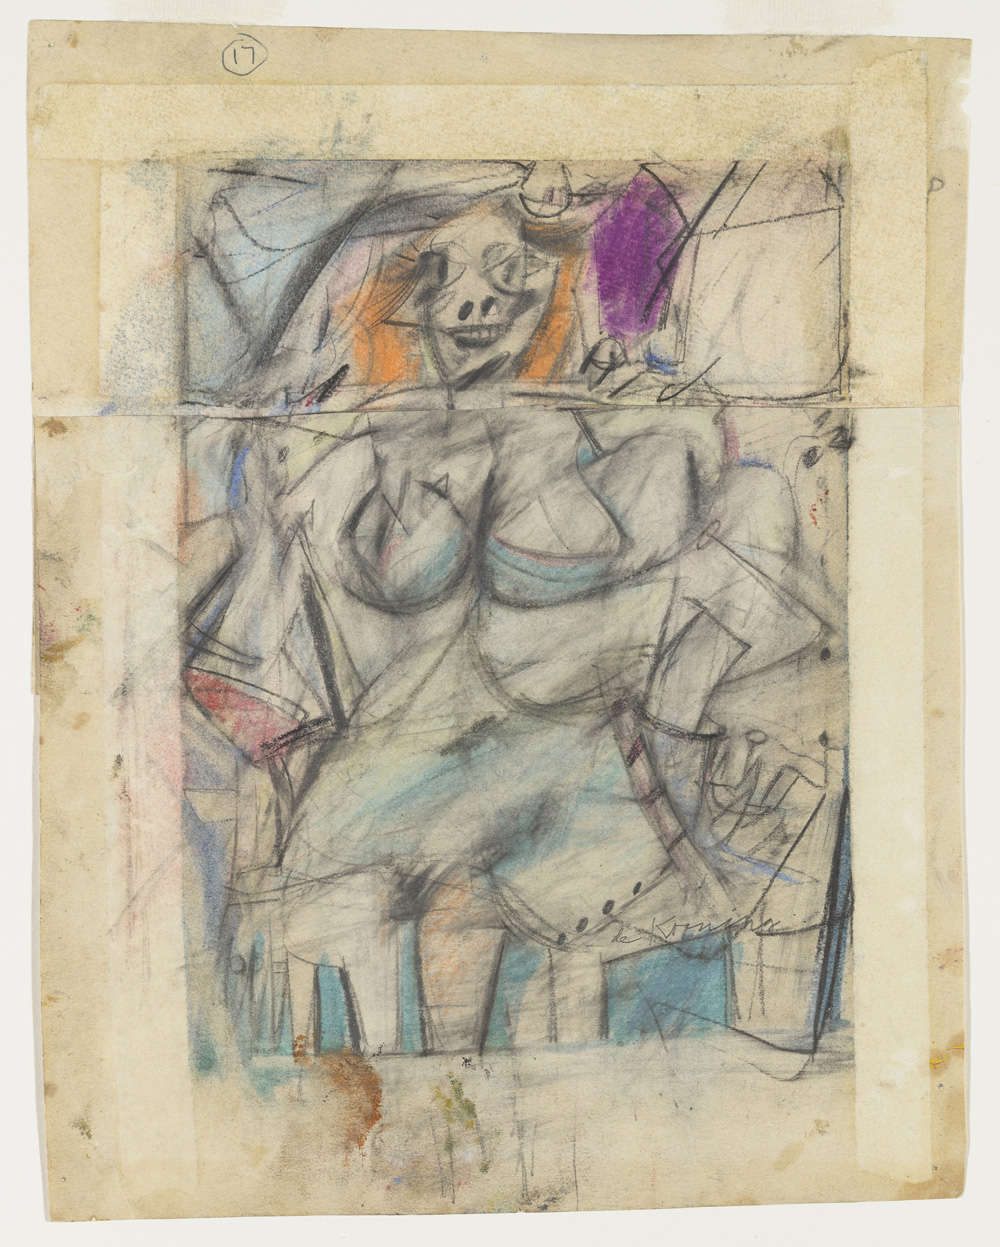 Willem de Kooning (American, born the Netherlands. 1904-1997) Seated Woman (1952) Pencil, pastel, and oil on two sheets of paper 12 1/8 x 9 1/2" (30.8 x 24.2 cm) The Museum of Modern Art, New York. The Lauder Foundation Fund © 2011 The Willem de Kooning Foundation/Artists Rights Society (ARS), New York